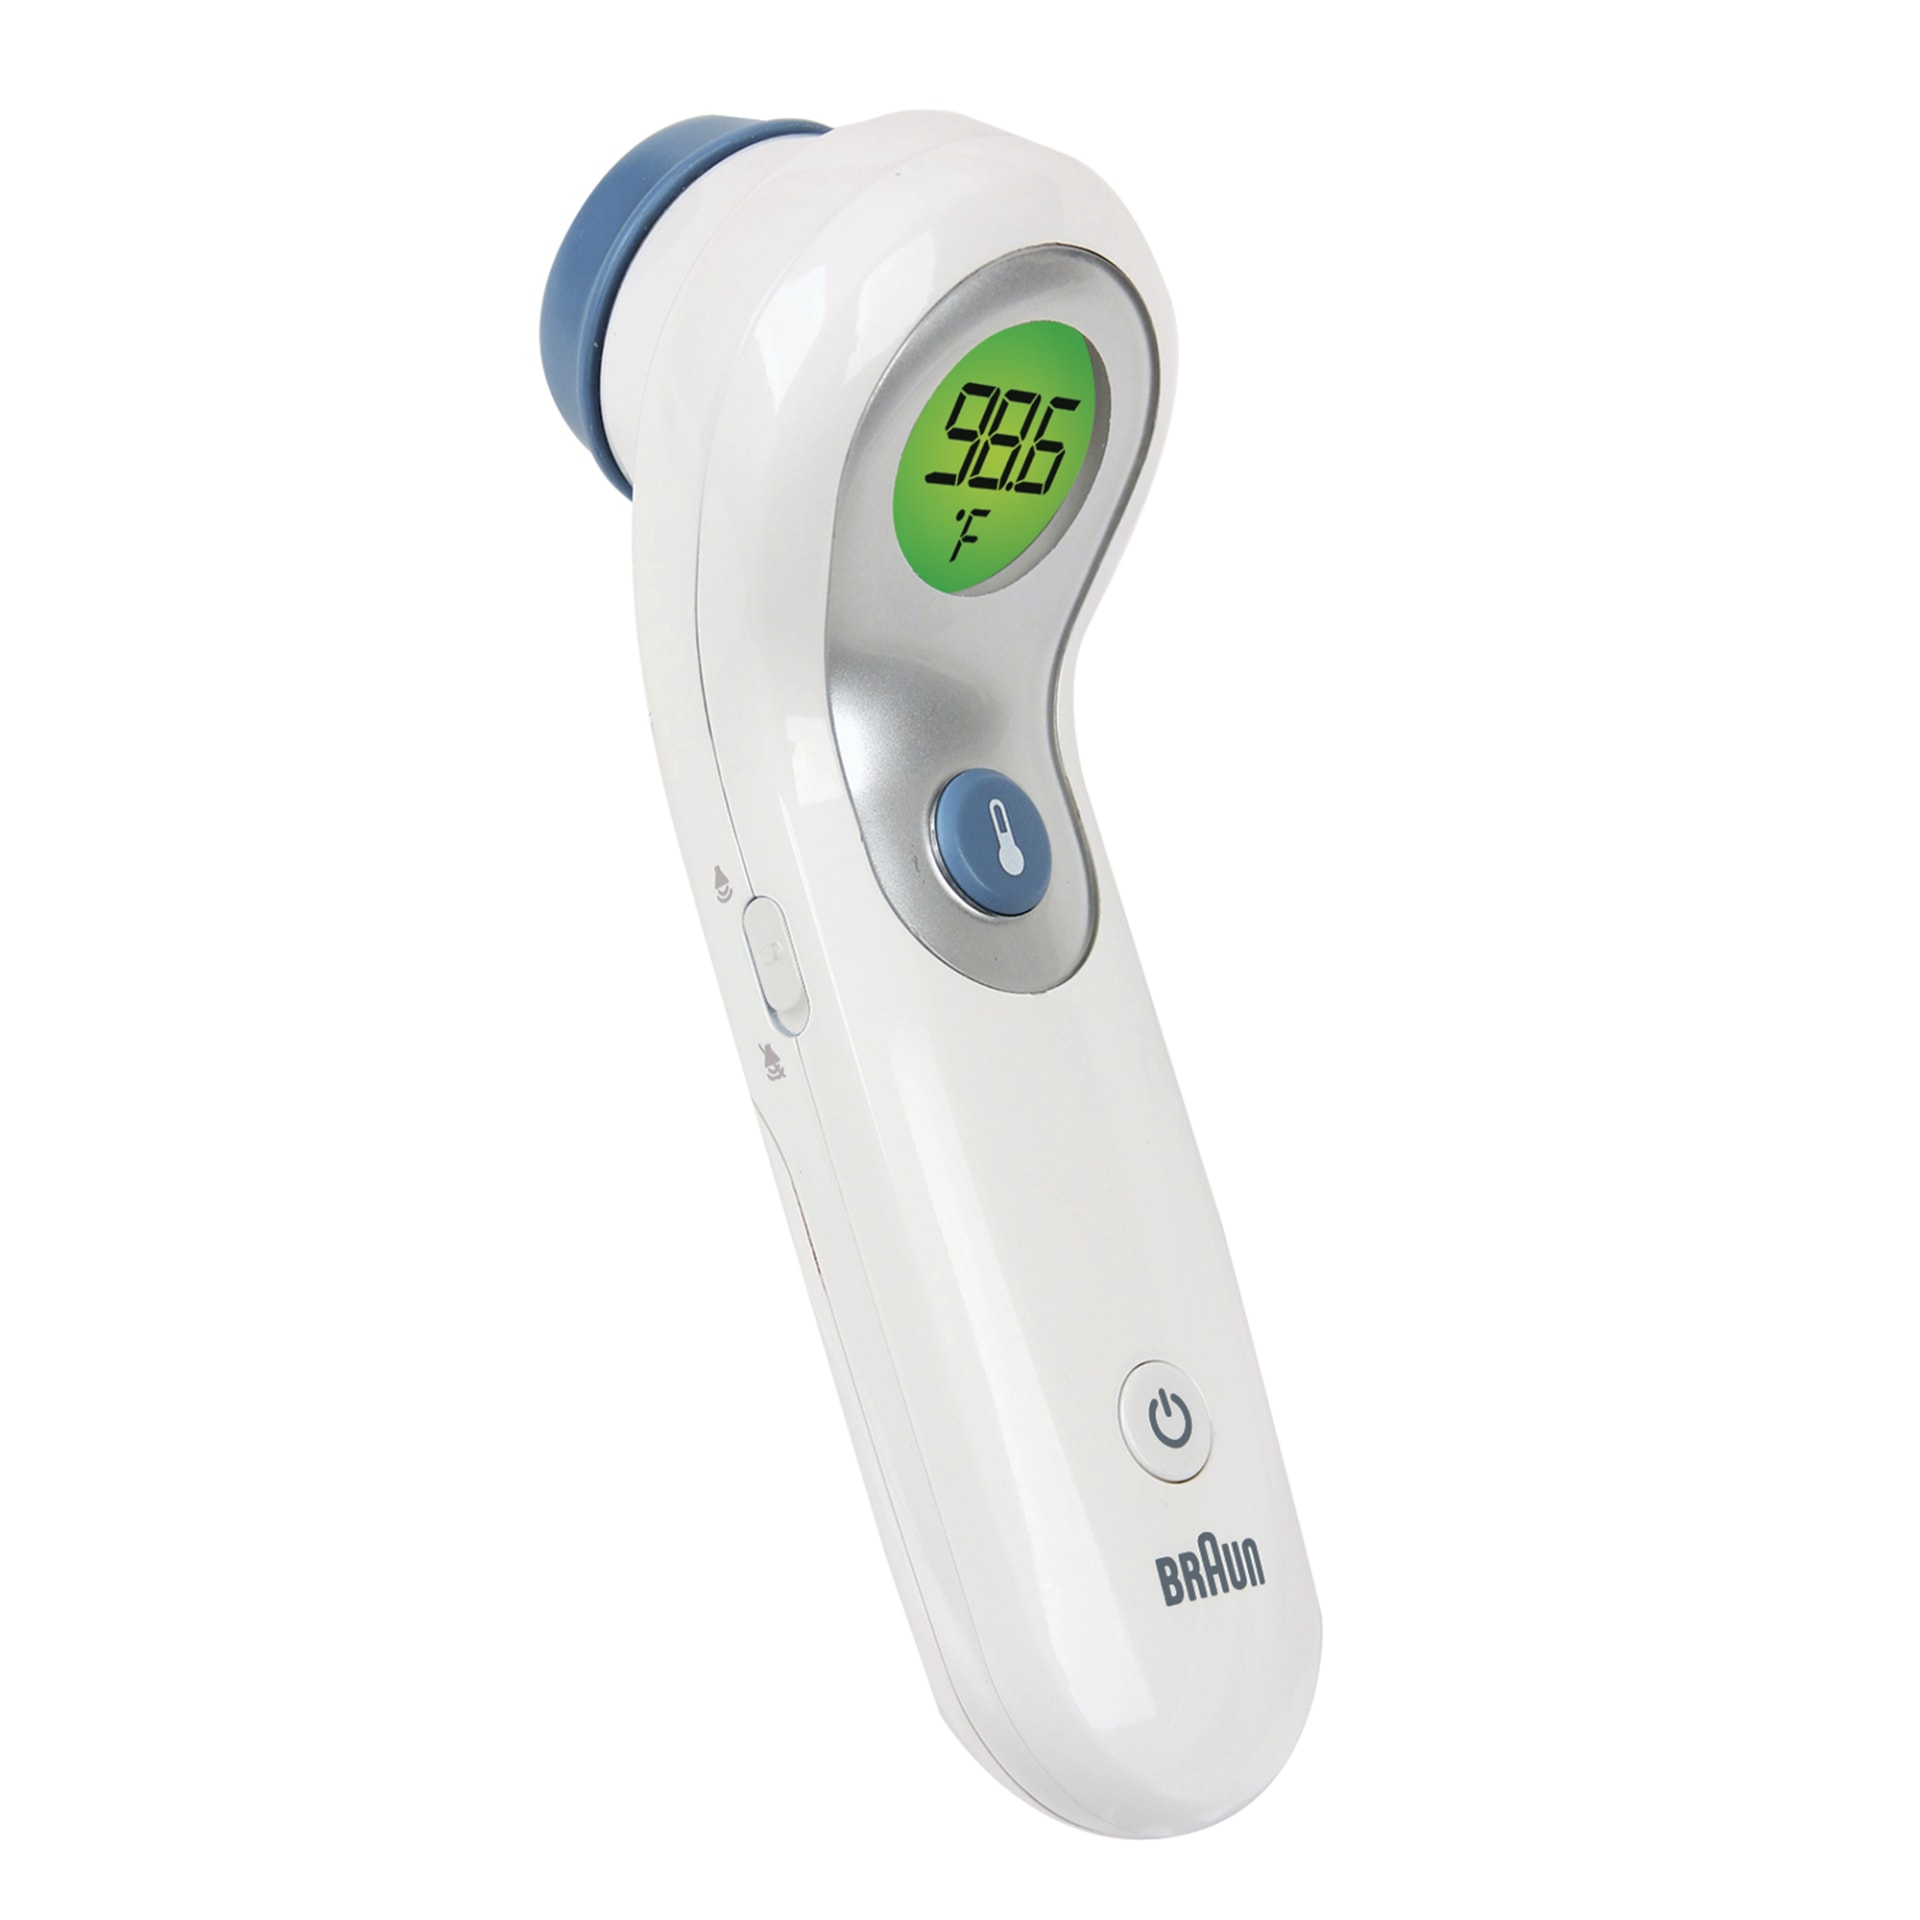 Animal Thermometer Digital LED Display Thermometer Fast Reading